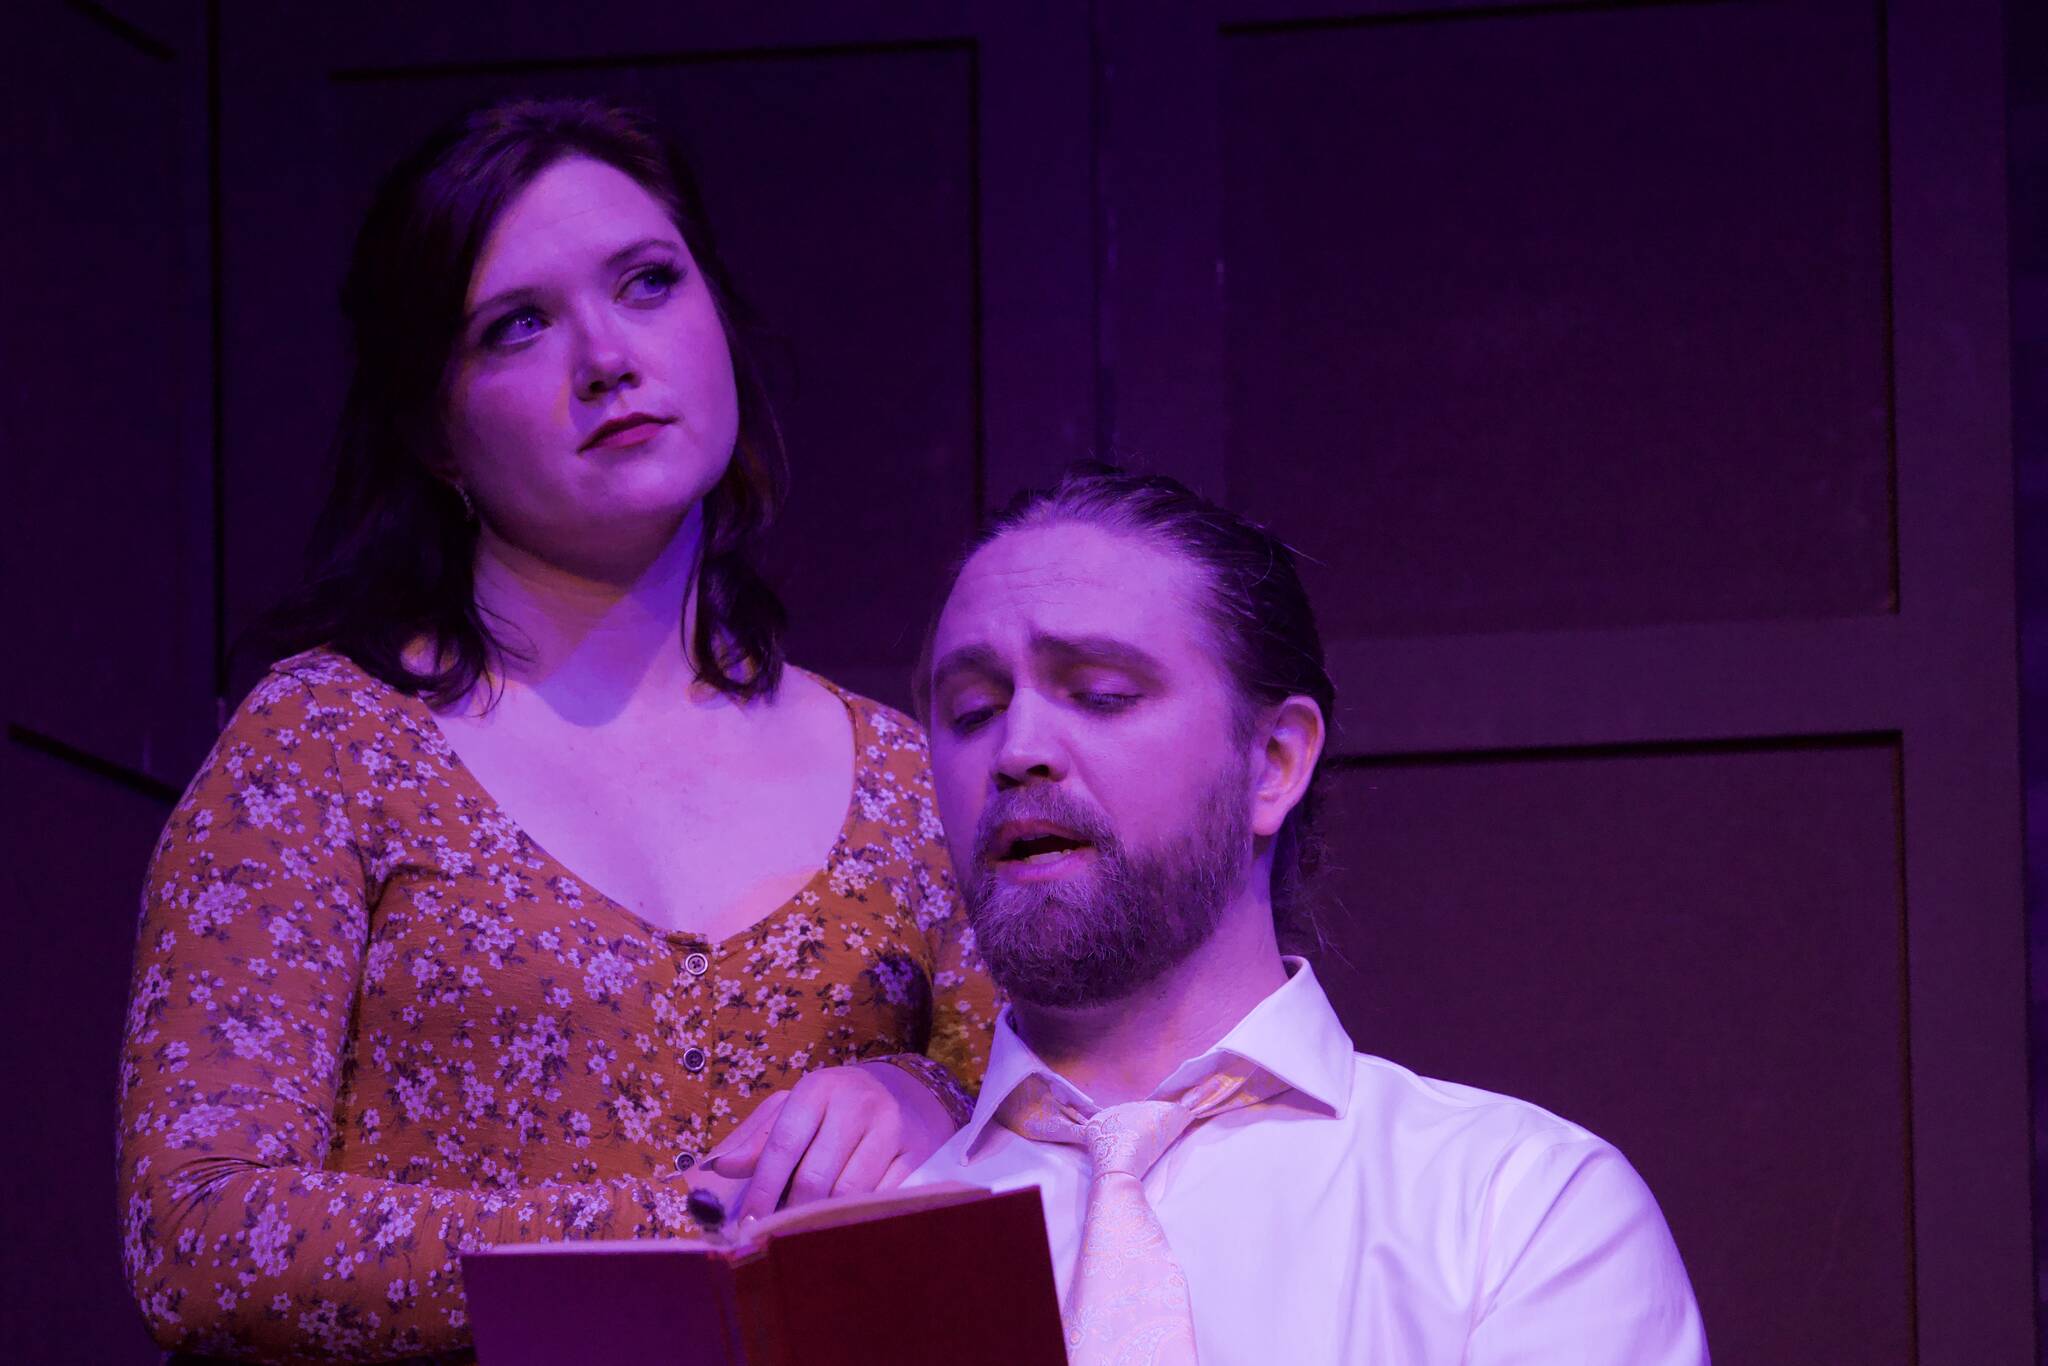 Photo by Rachel Rosen/Whidbey News-Times
David Thuet and Anna Schenck play David Ames and Sarah McKeon in “Earth and Sky.” David Ames is found dead after the couple’s whirlwind romance.